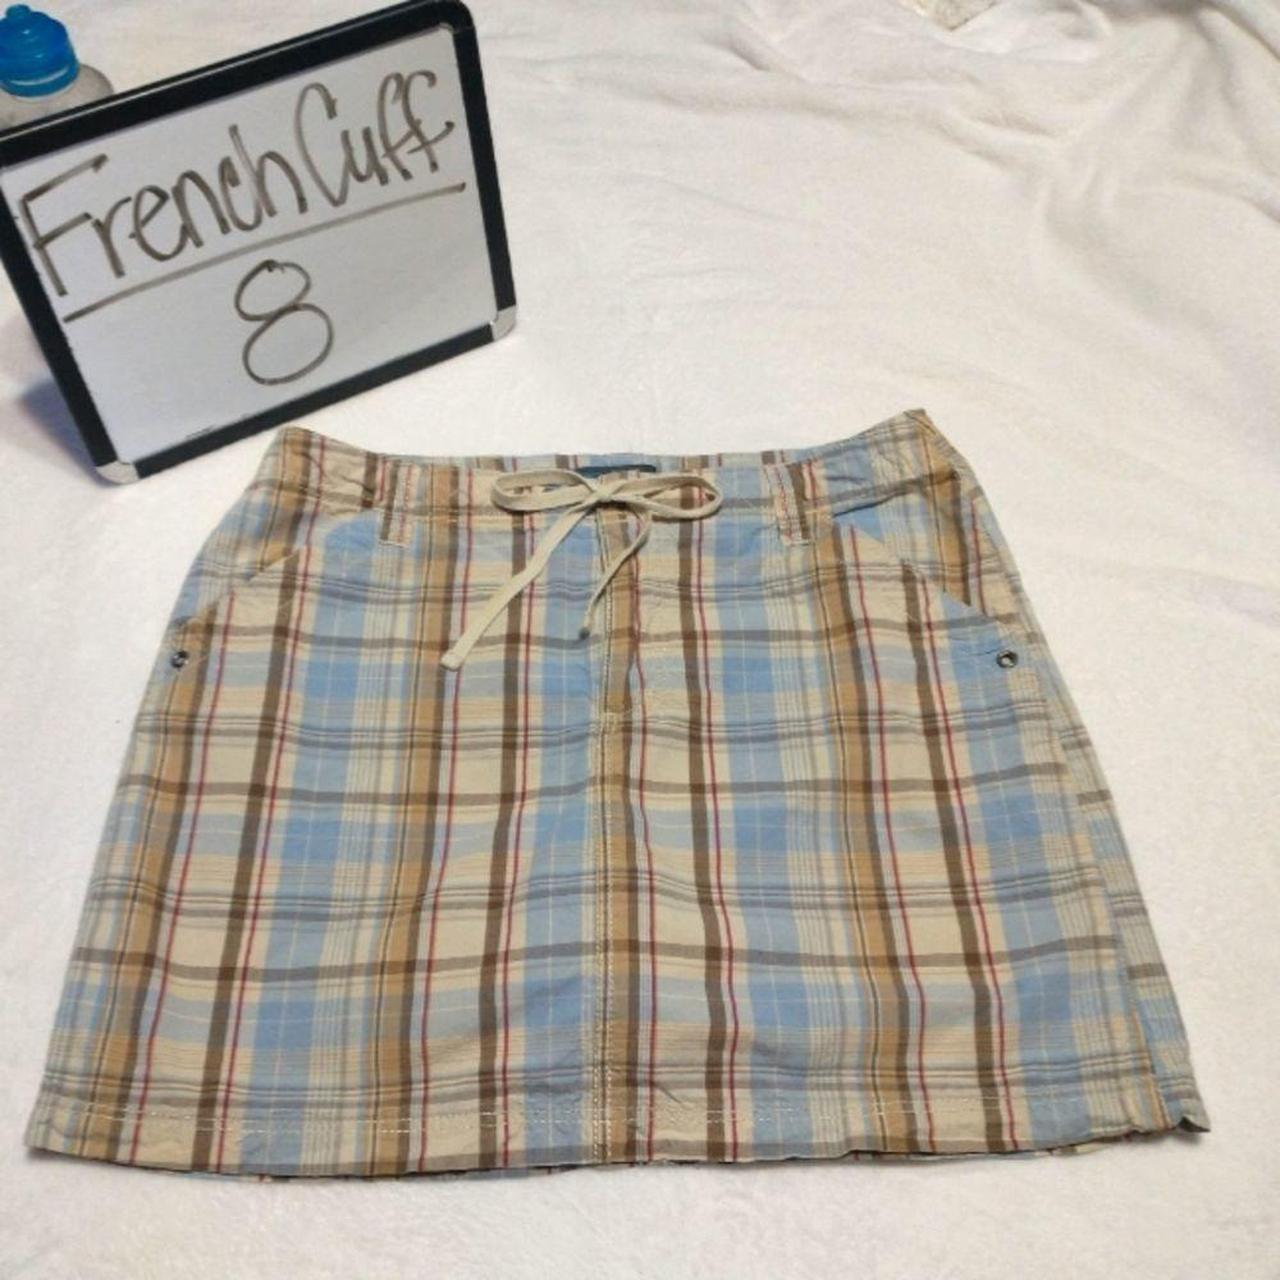 Plaid skort , shorts from the back Skirt in the - Depop